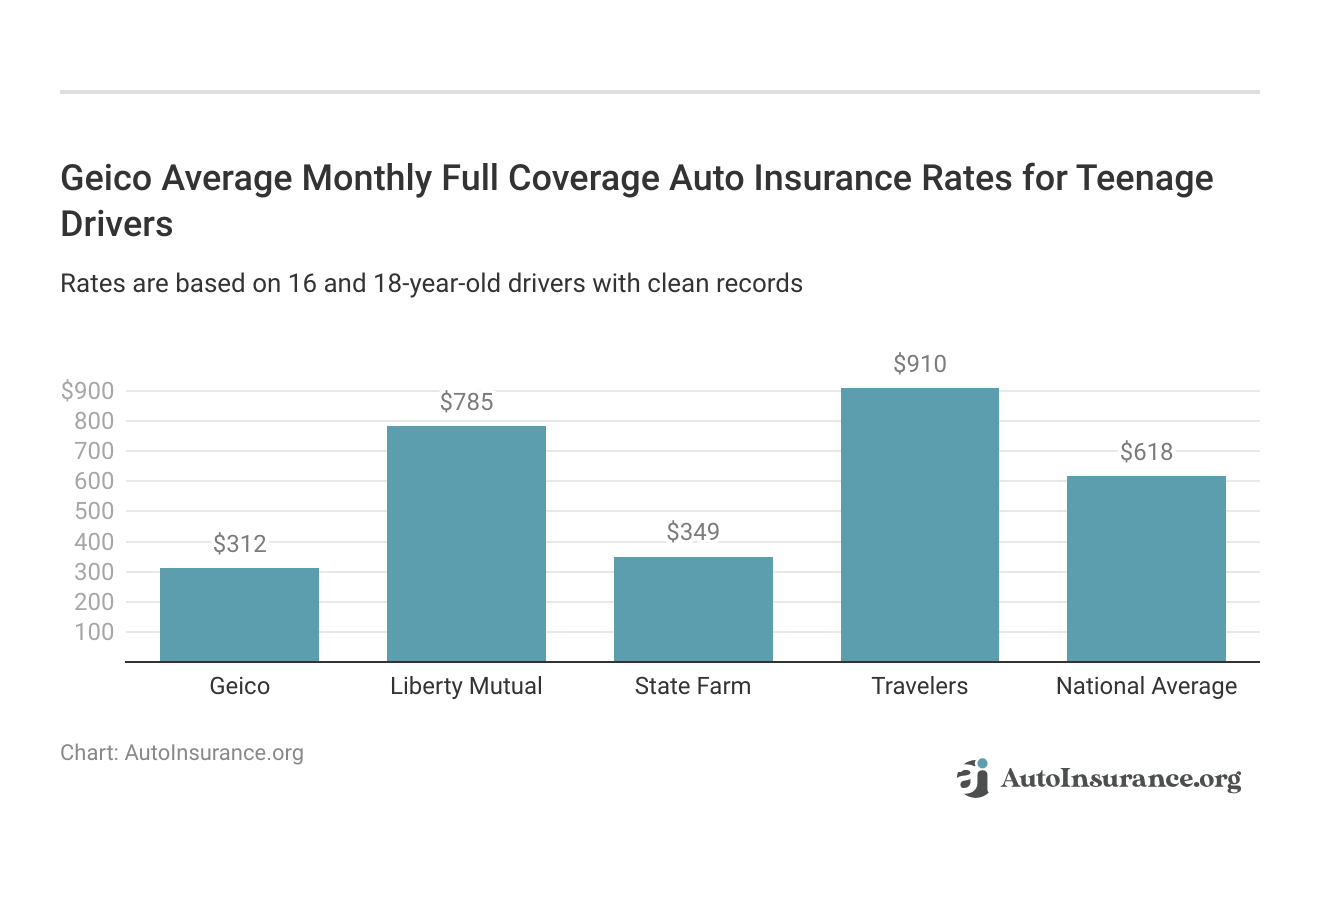 <h3>Geico Average Monthly Full Coverage Auto Insurance Rates for Teenage Drivers</h3>